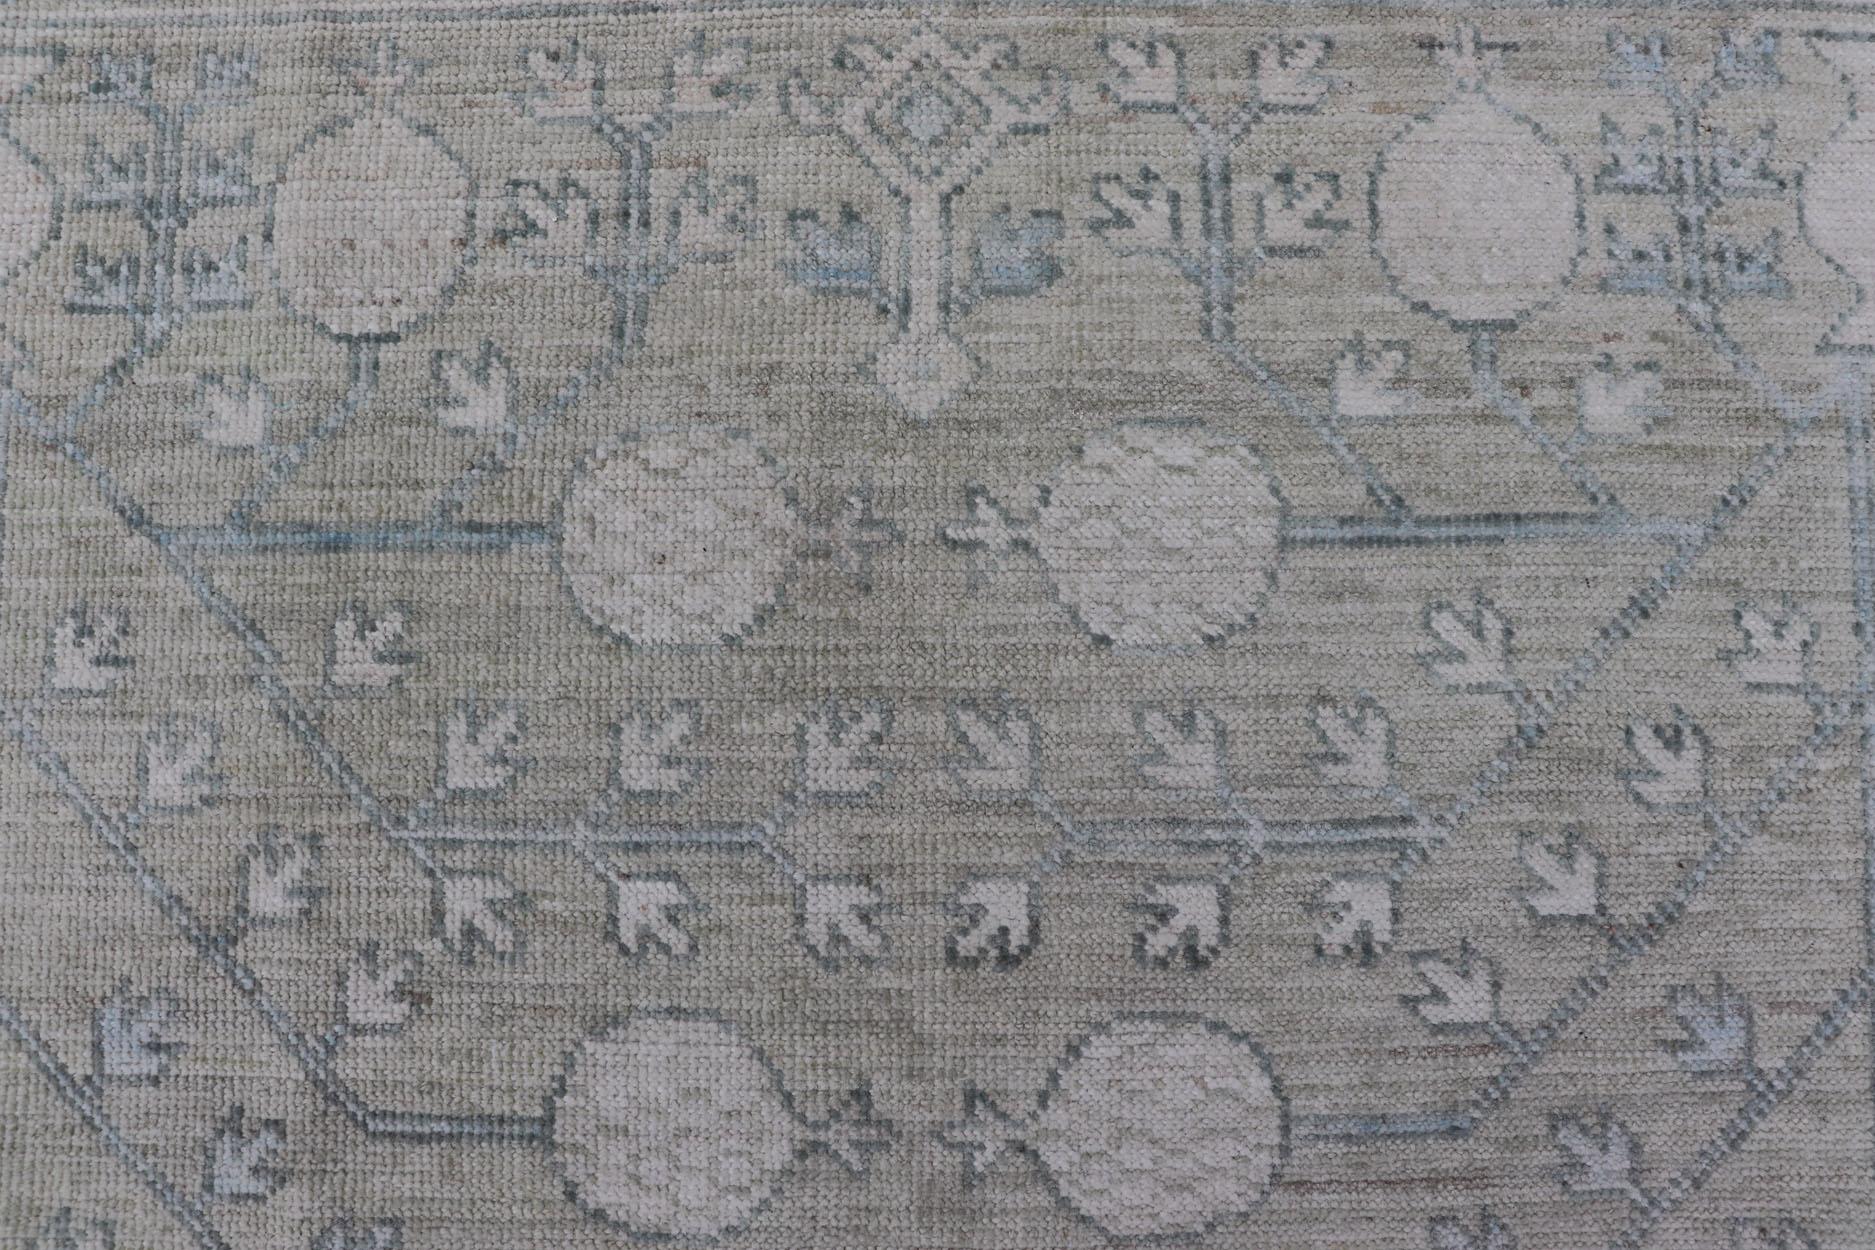 Modern Tribal Khotan Rug in Shades of Cream, Green, Blue, and Gray For Sale 5